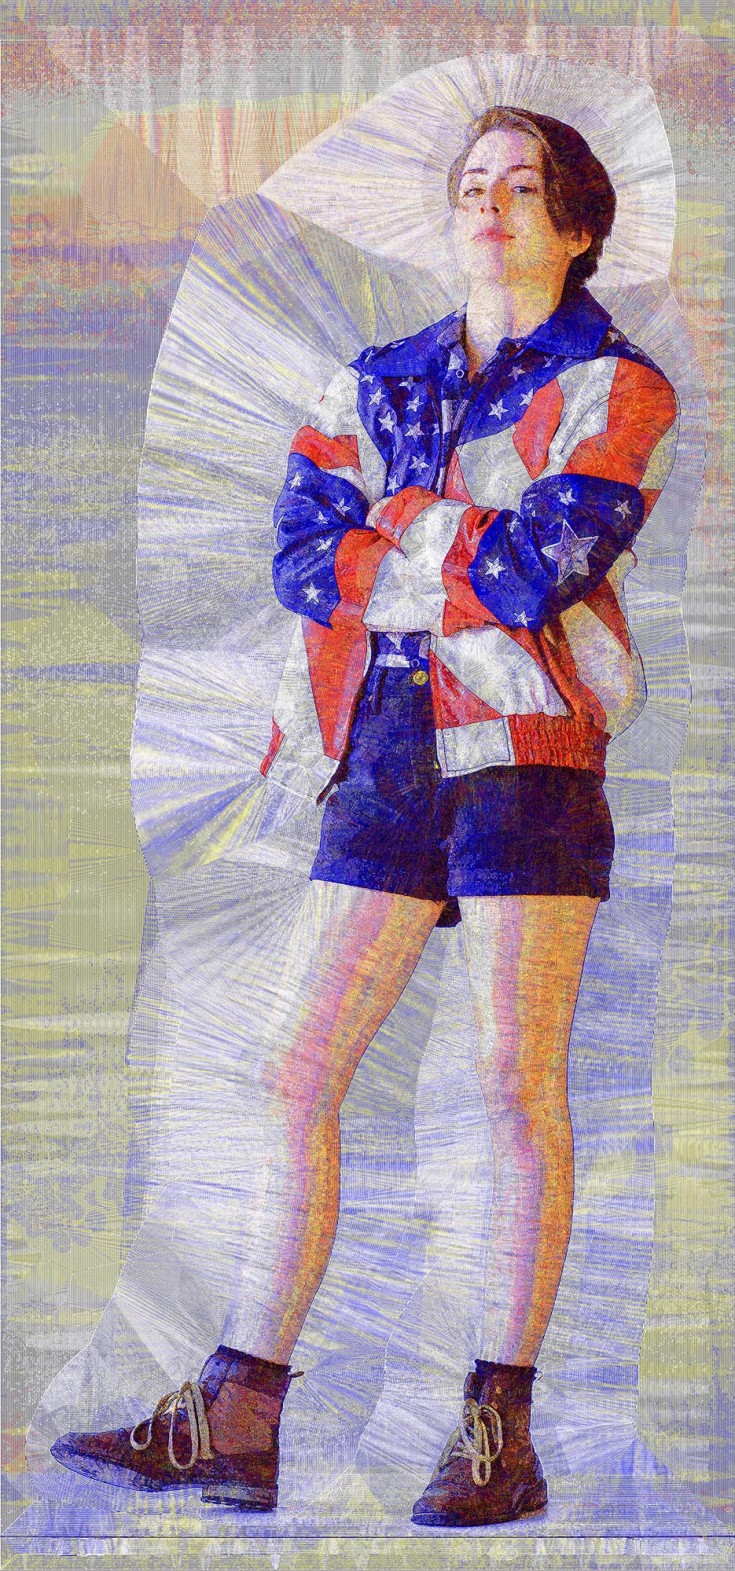 "Carrie Americana" 2014, 40 x 21 inches, archival print on aluminum